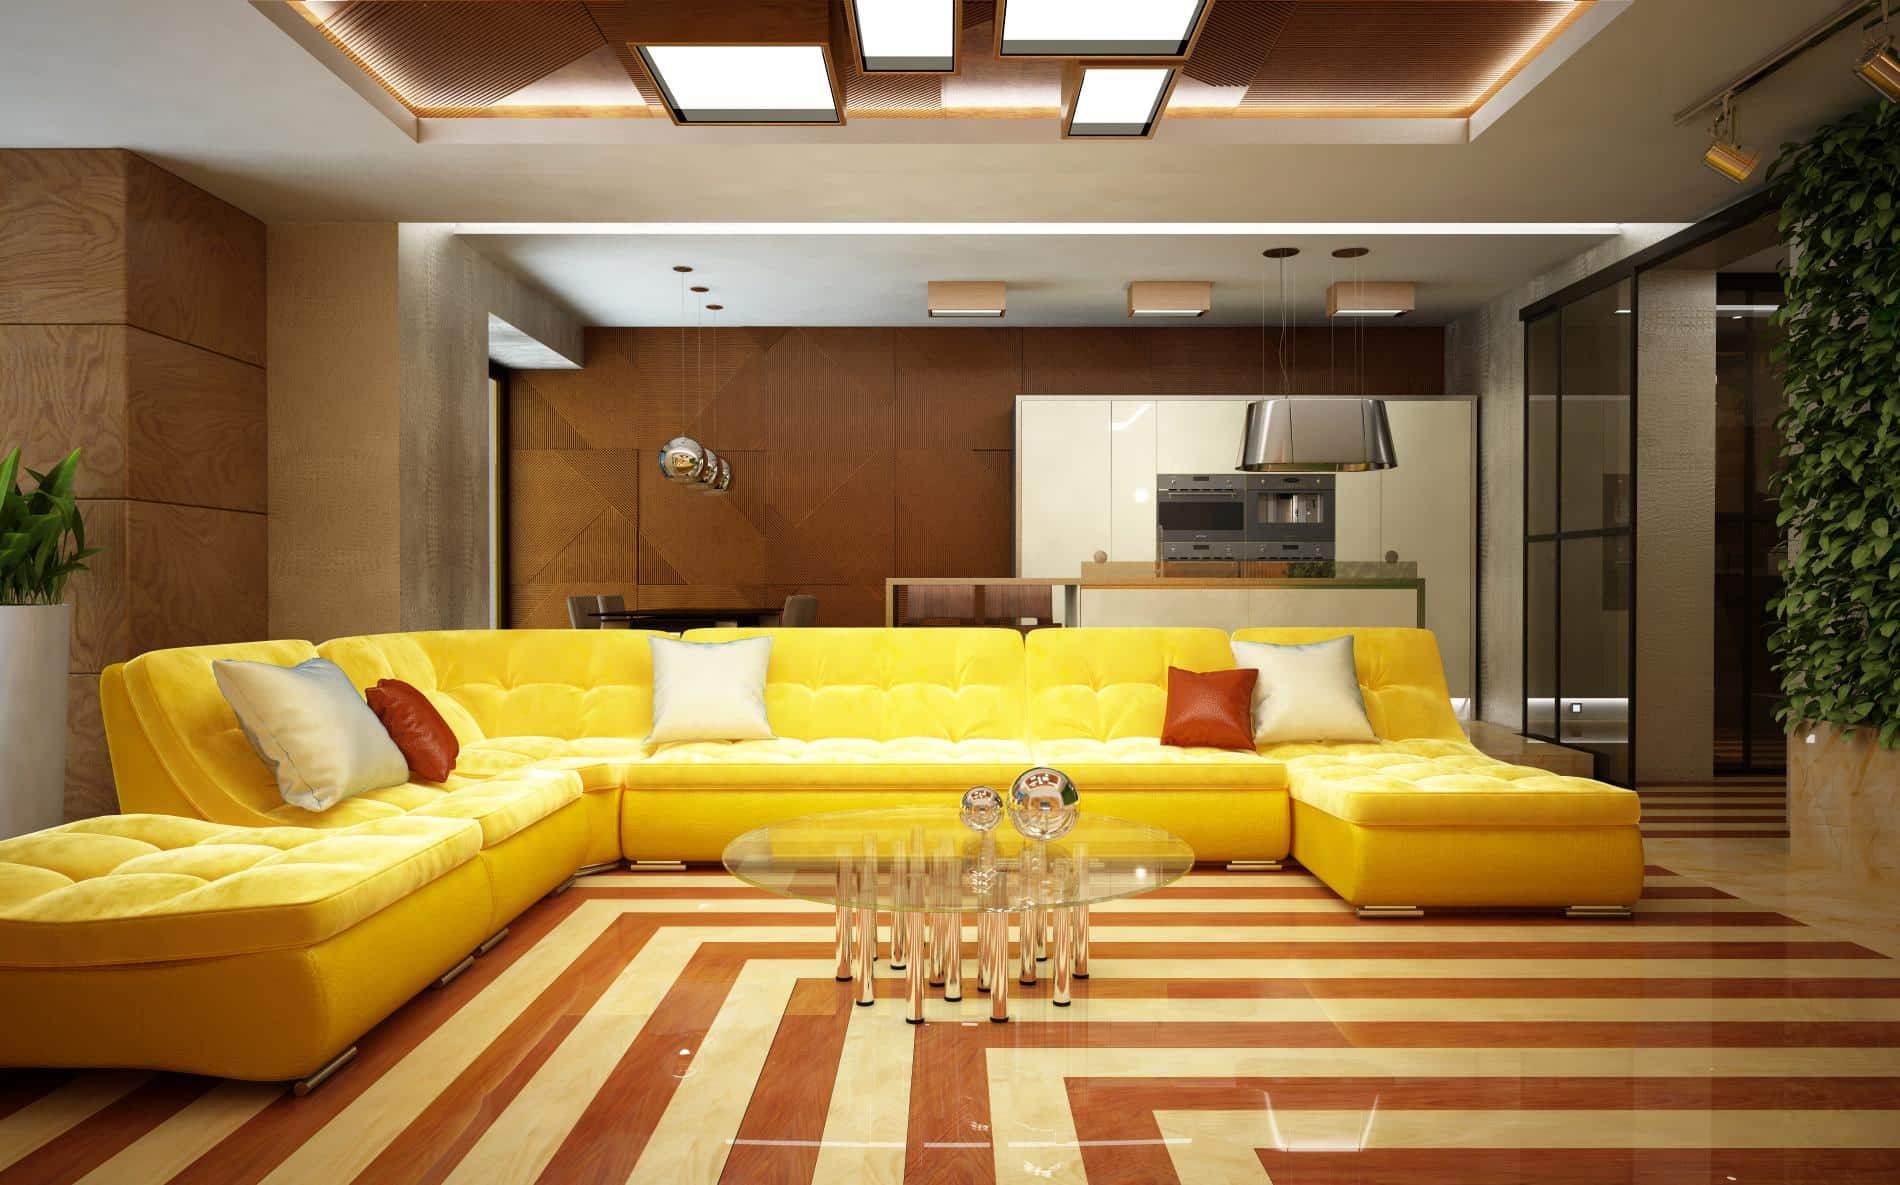 Bright Yellow Living Room Interior Decoration and Design Ideas. Complex lighting and stripes on the carpet make the room bigger